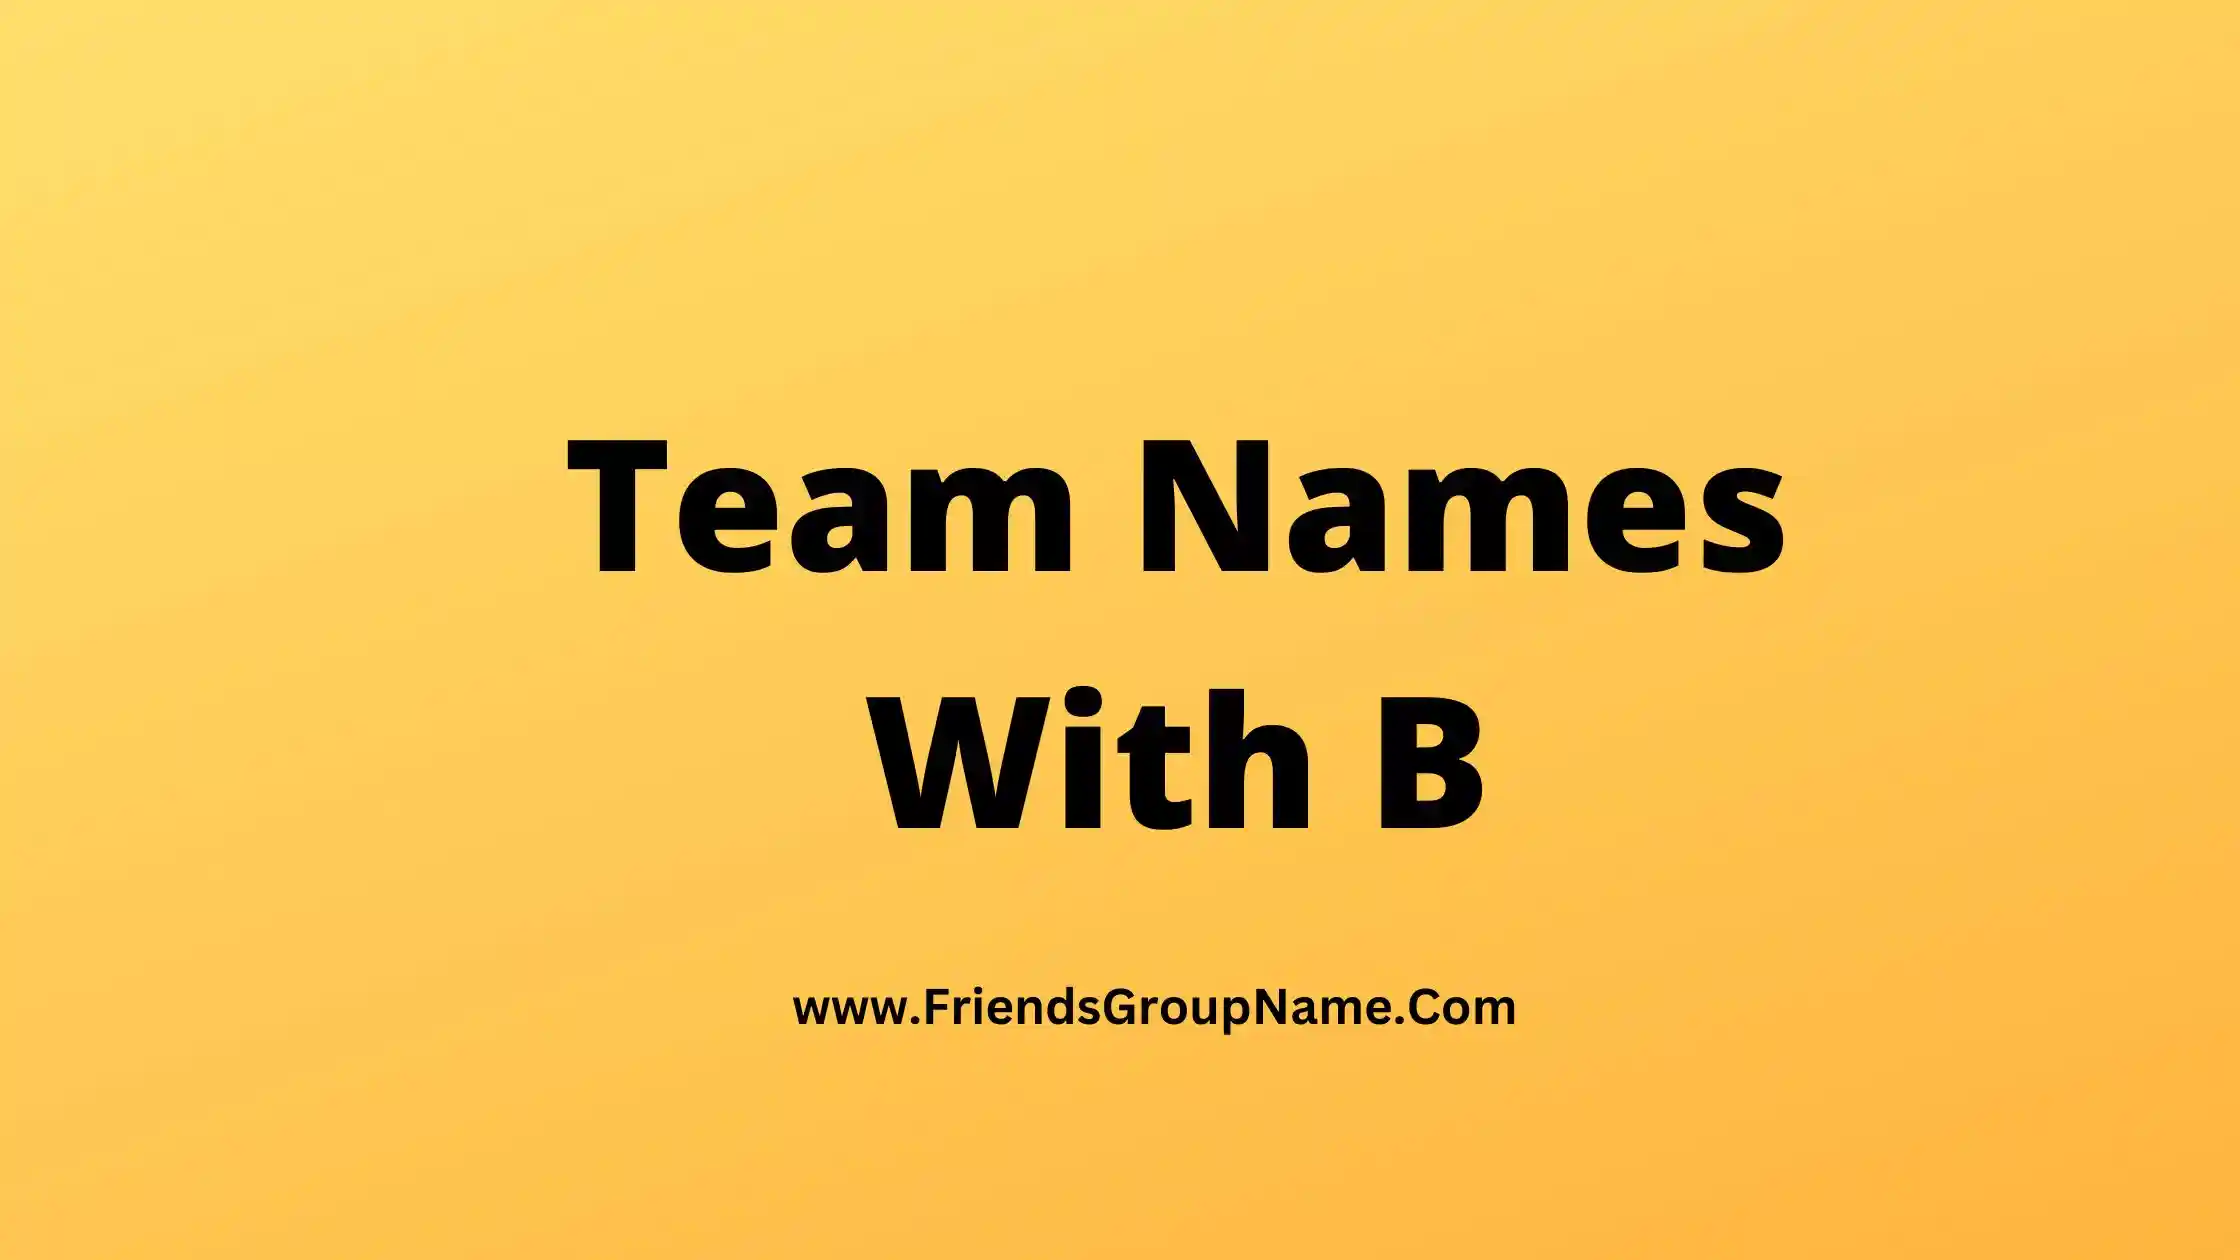 Team Names With B